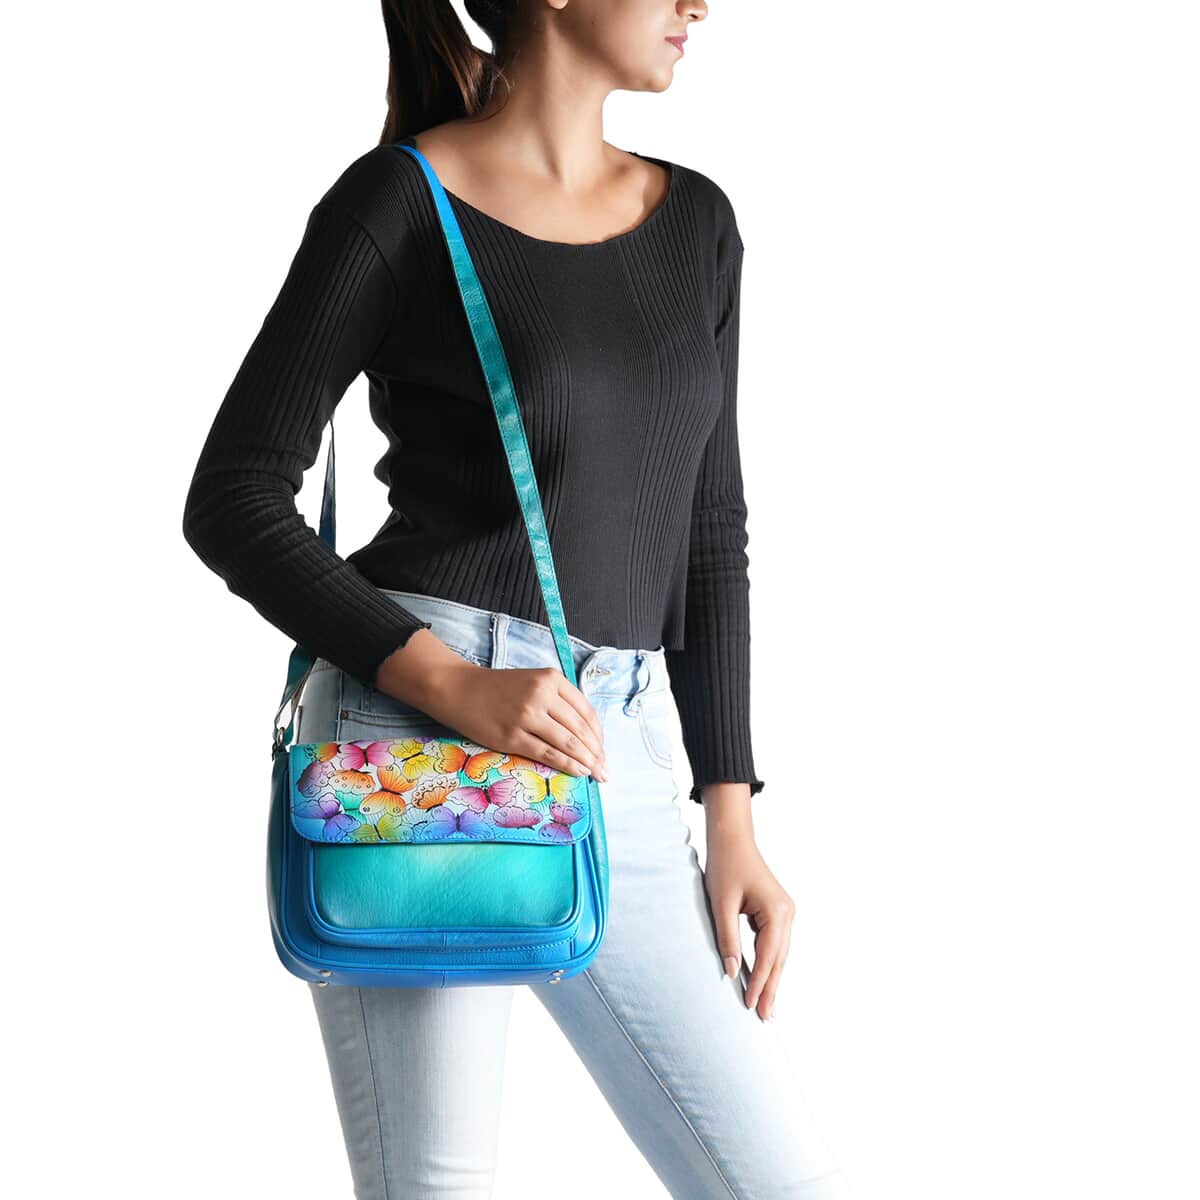 "SUKRITI 100% Genuine Leather Crossbody Bag Theme: Butterfly Color: Blue Size: 10 x 3 x 7 inches" image number 1